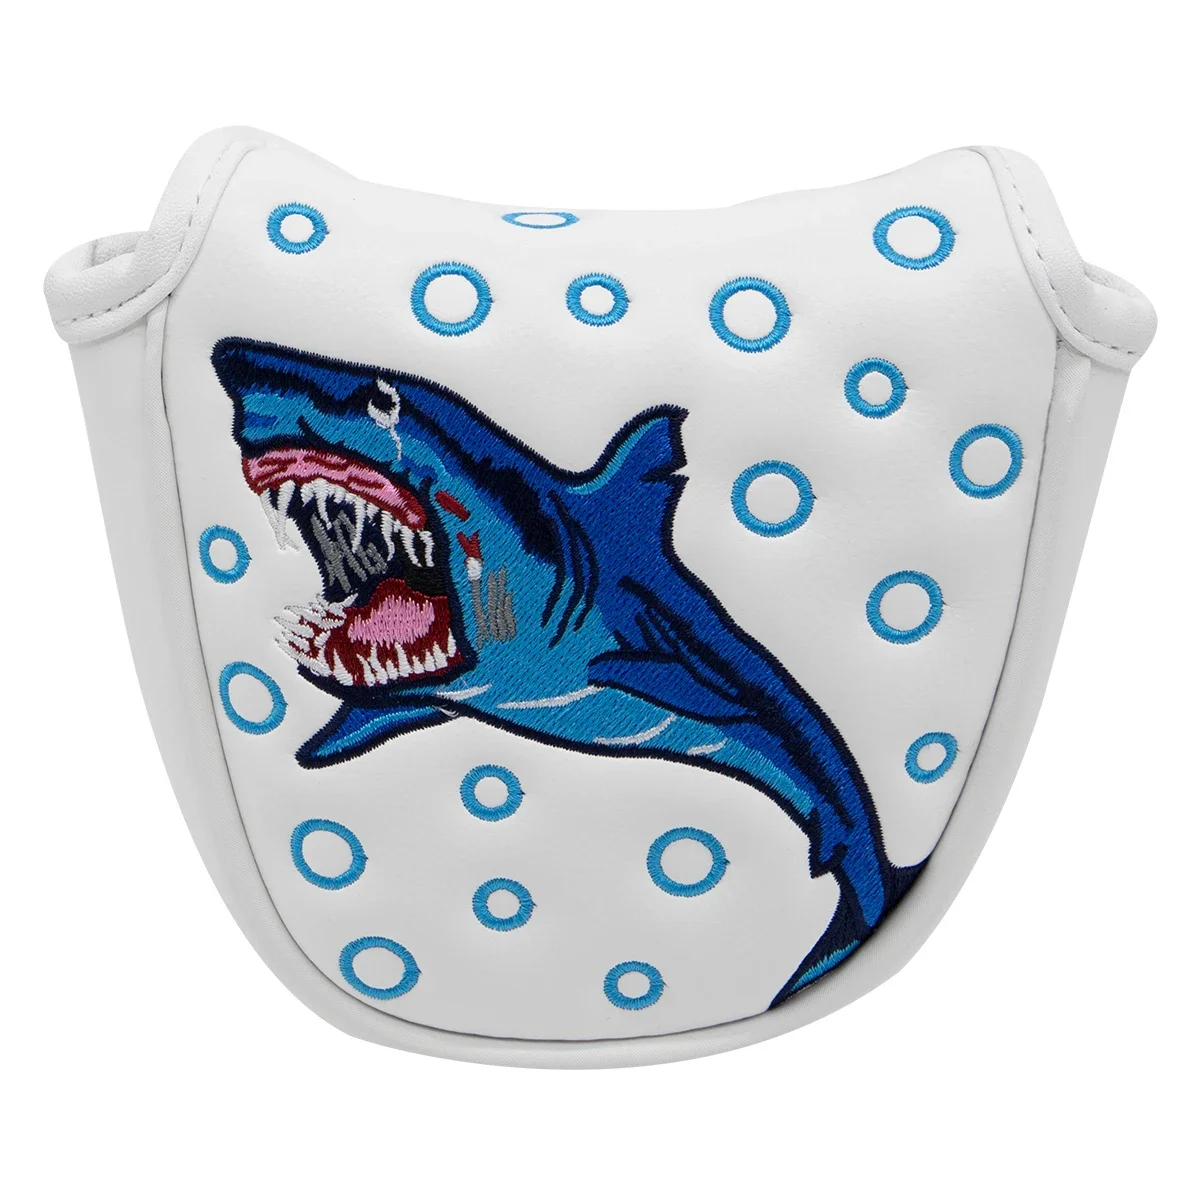 

2024 Shark Golf Putter Cover Golf Club Head Covers for Putter PU Leather Mallet Putter Headcover with Magnetic Closure